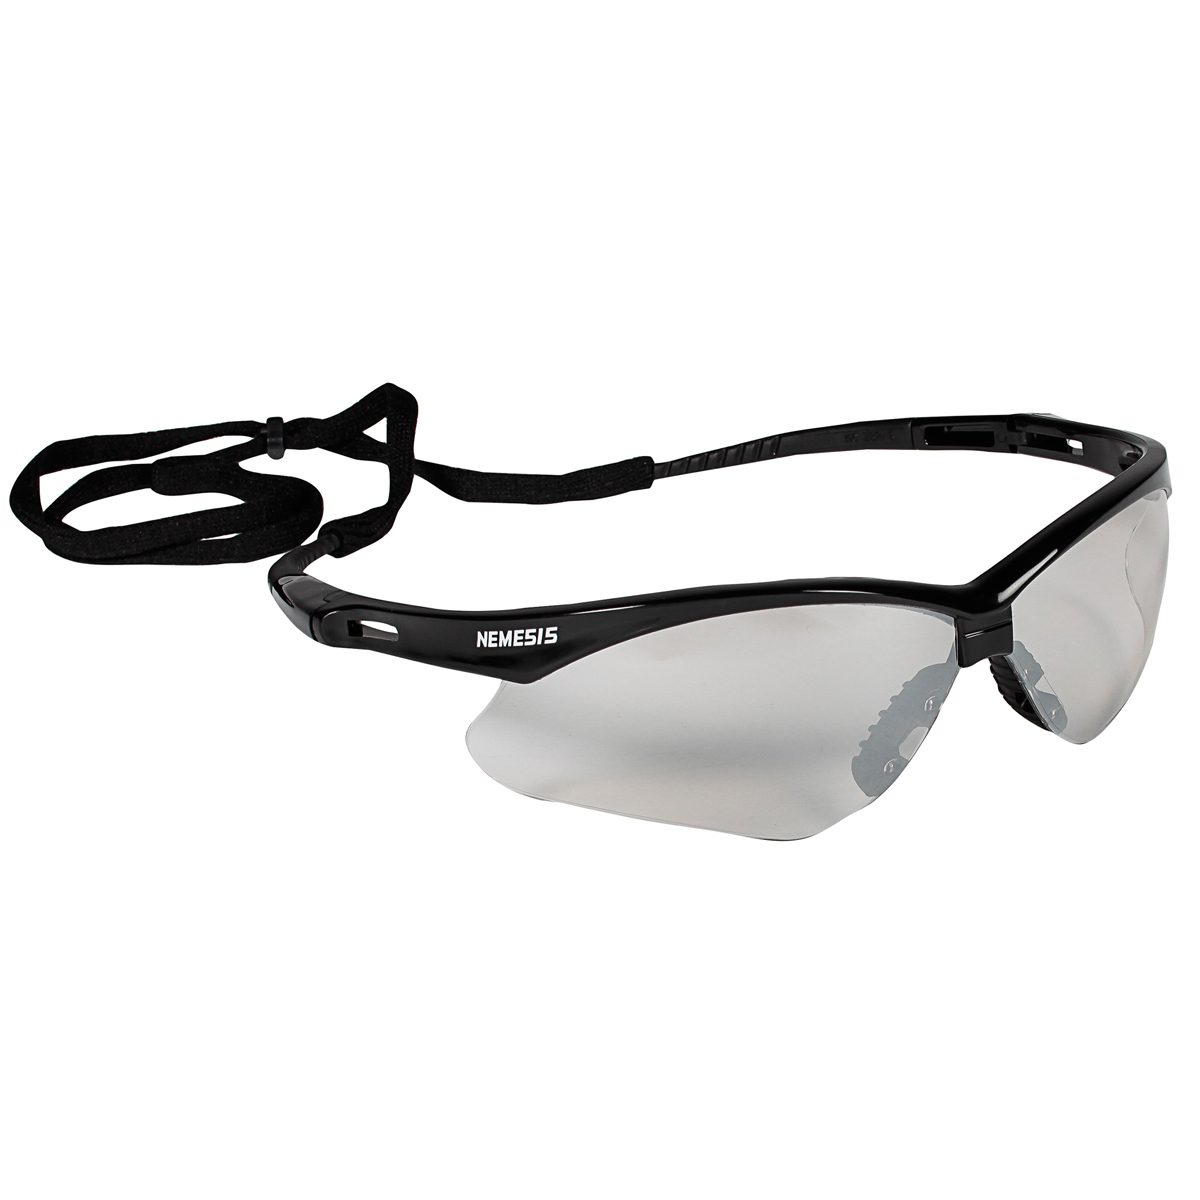 Kimberly-Clark Professional* KleenGuard™ Nemesis* Black Safety Glasses With Clear Indoor/Outdoor Hard Coat Lens (Availability re